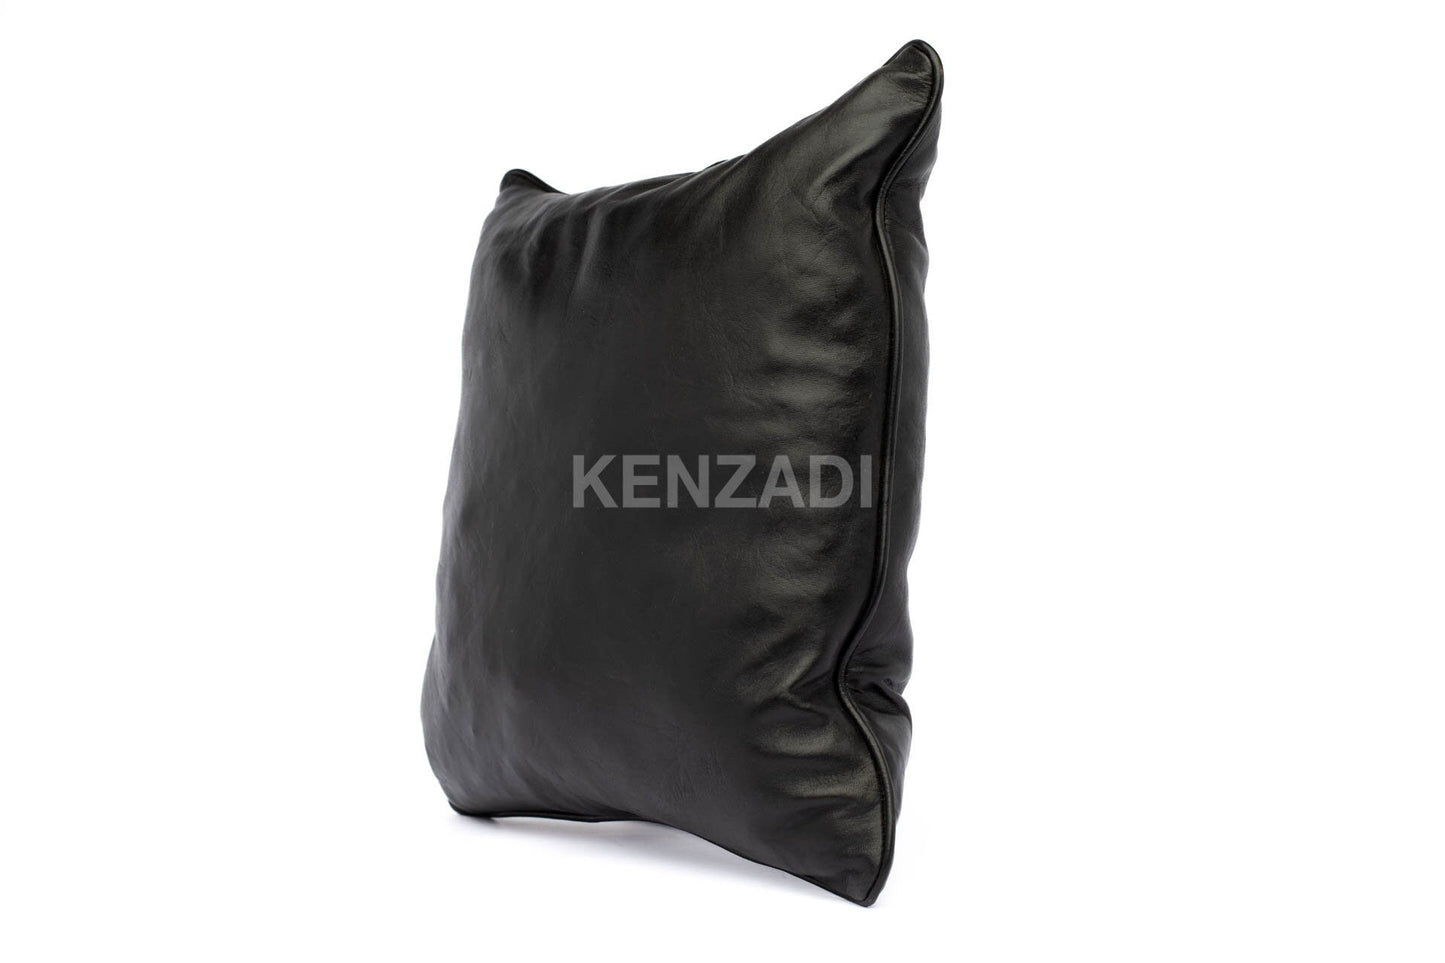 Moroccan Leather Pillow, Black traditional Throw Pillow Case by Kenzadi - Handmade by My Poufs